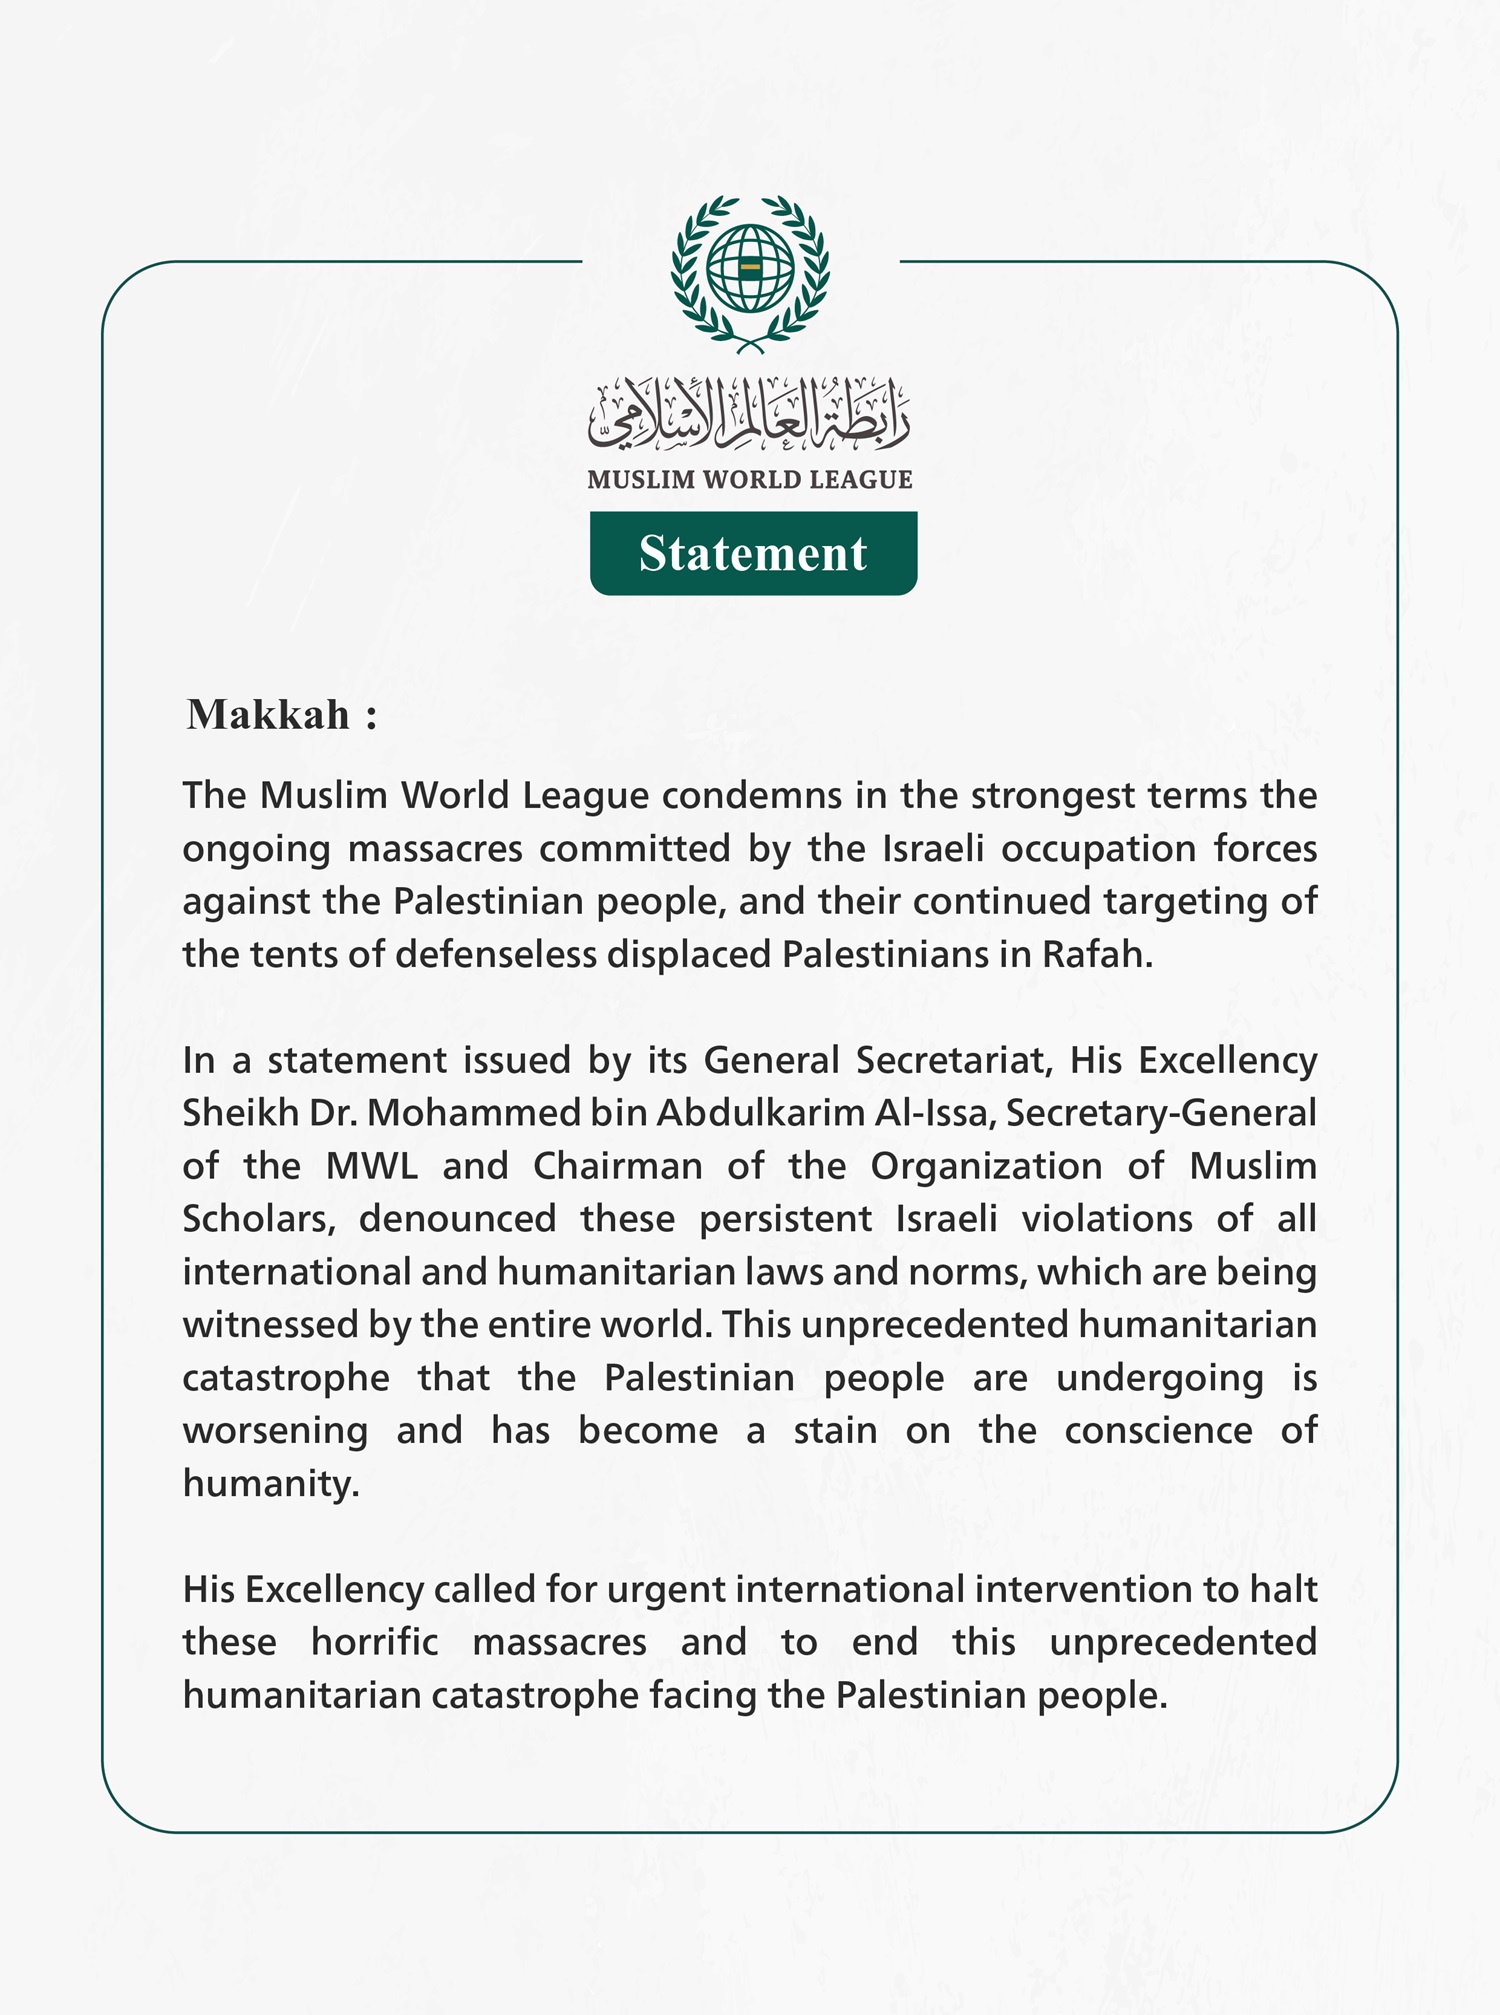 The Muslim World League (MWL) strongly condemns the continued genocidal massacres perpetrated by Israeli occupation forces against the Palestinian people. 